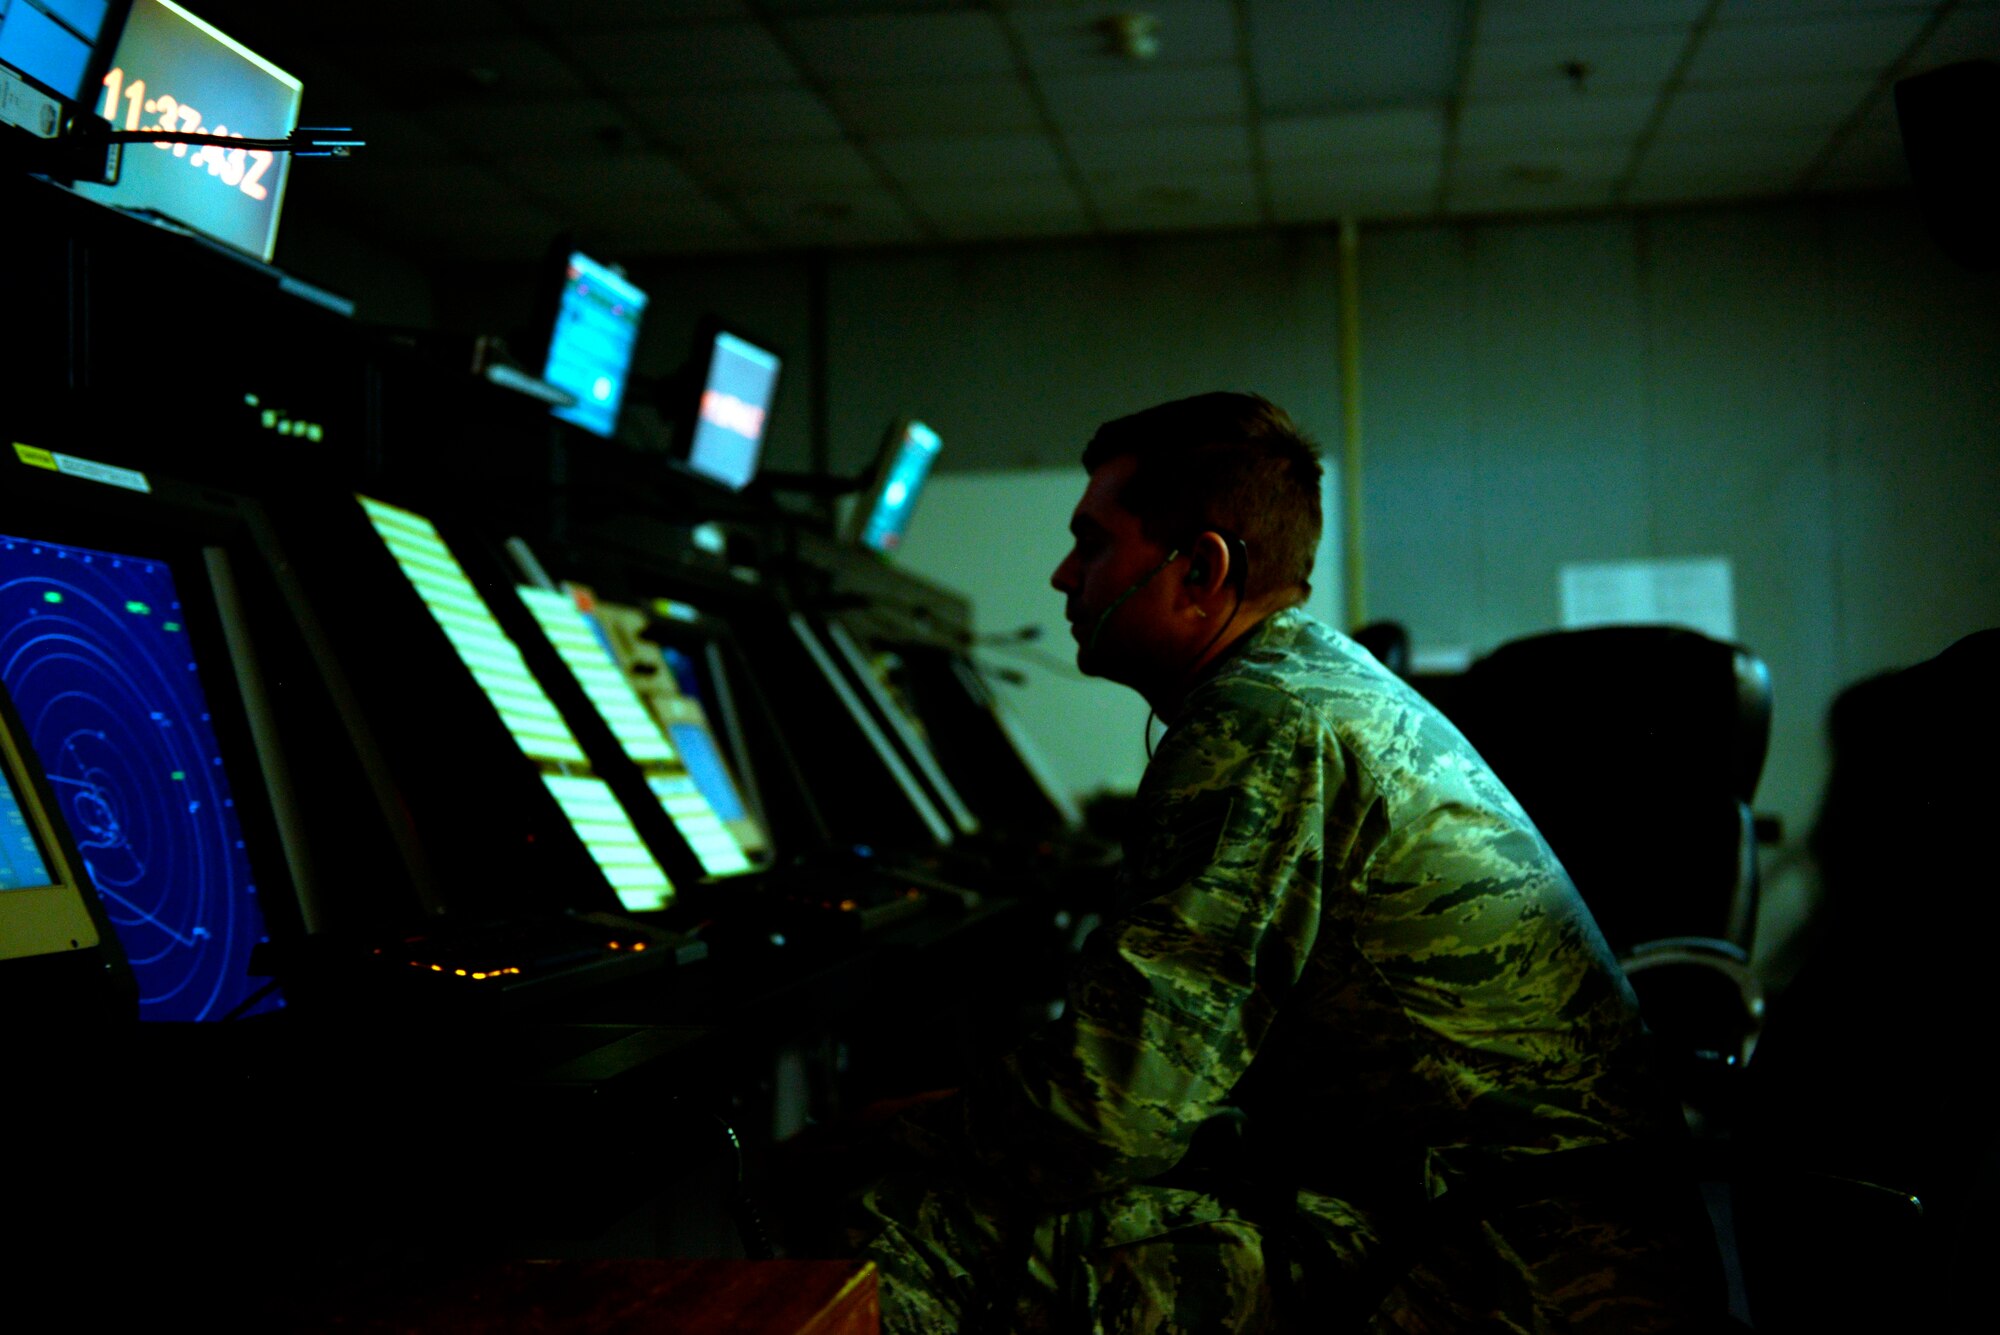 Staff Sgt. Brandon Bantau, 65th Operations Support Squadron air traffic control watch supervisor, monitors a radar approach control screen for incoming aircraft at Lajes Field, Azores, Feb. 7, 2016. Lajes Field, operated by the 65th Air Base Group, became a geographically separated unit of the 86th Airlift Wing in August, 2015. (U.S. Air Force photo/Tech. Sgt. Kristopher Levasseur)Levasseur)